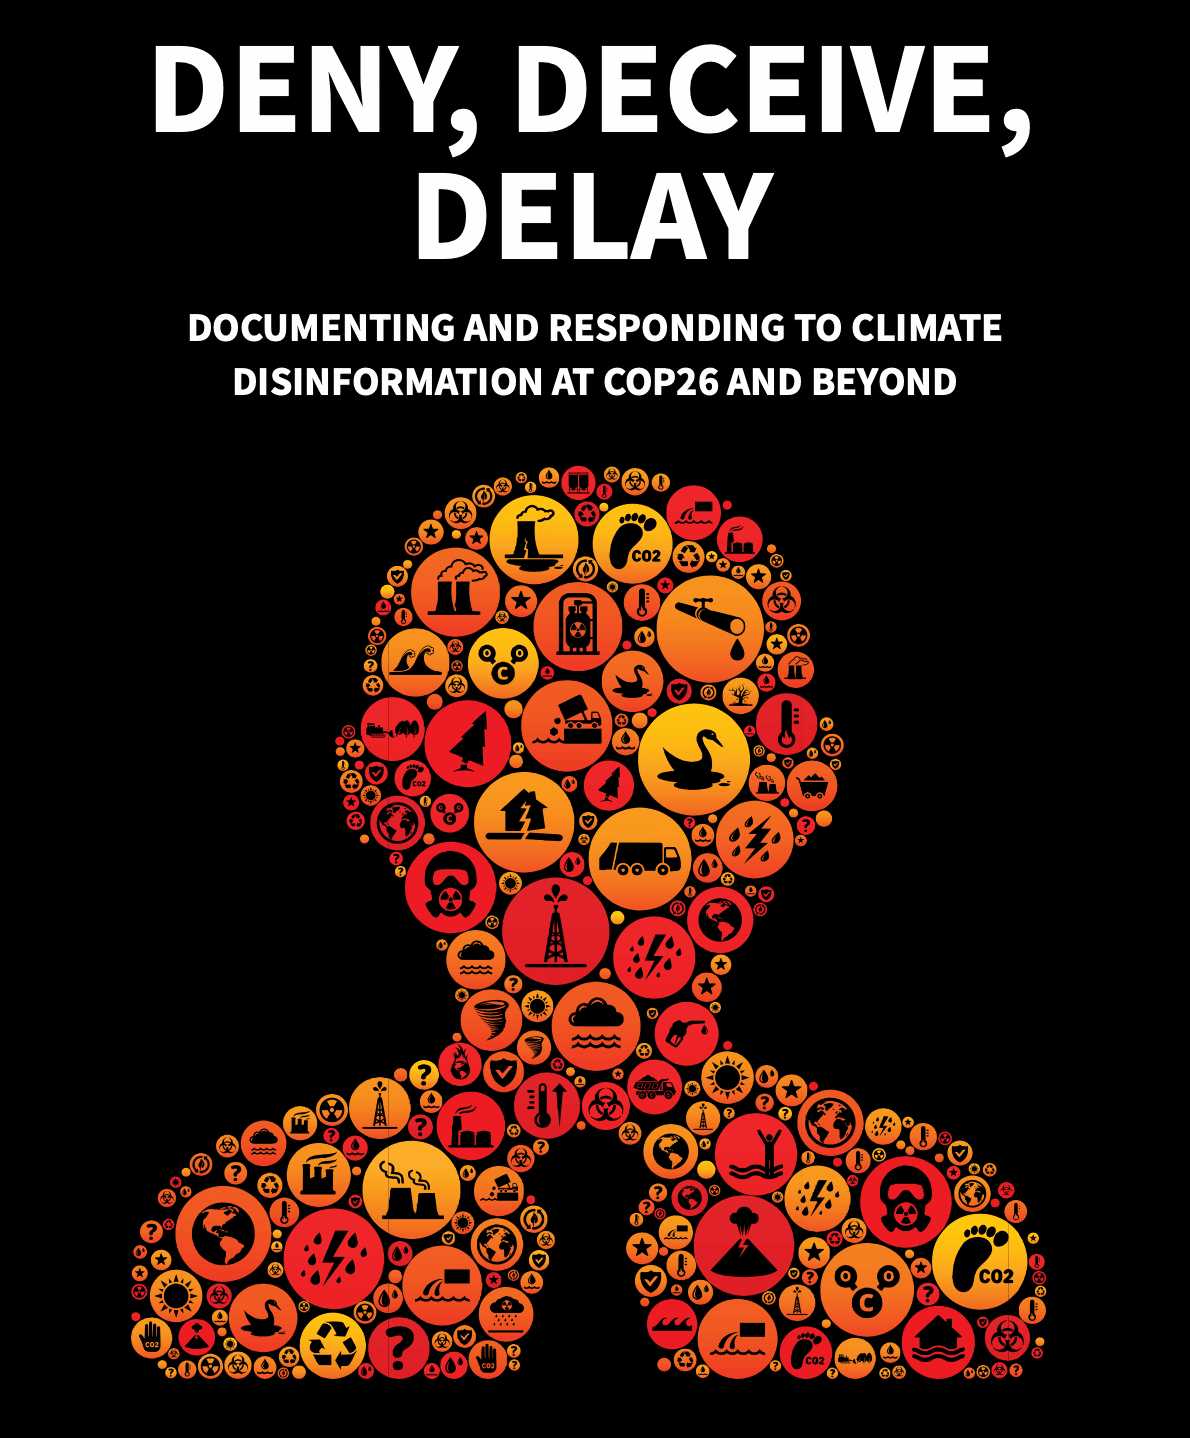 Deny, Deceive, Delay: Documenting Climate Disinformation at COP26 and Beyond